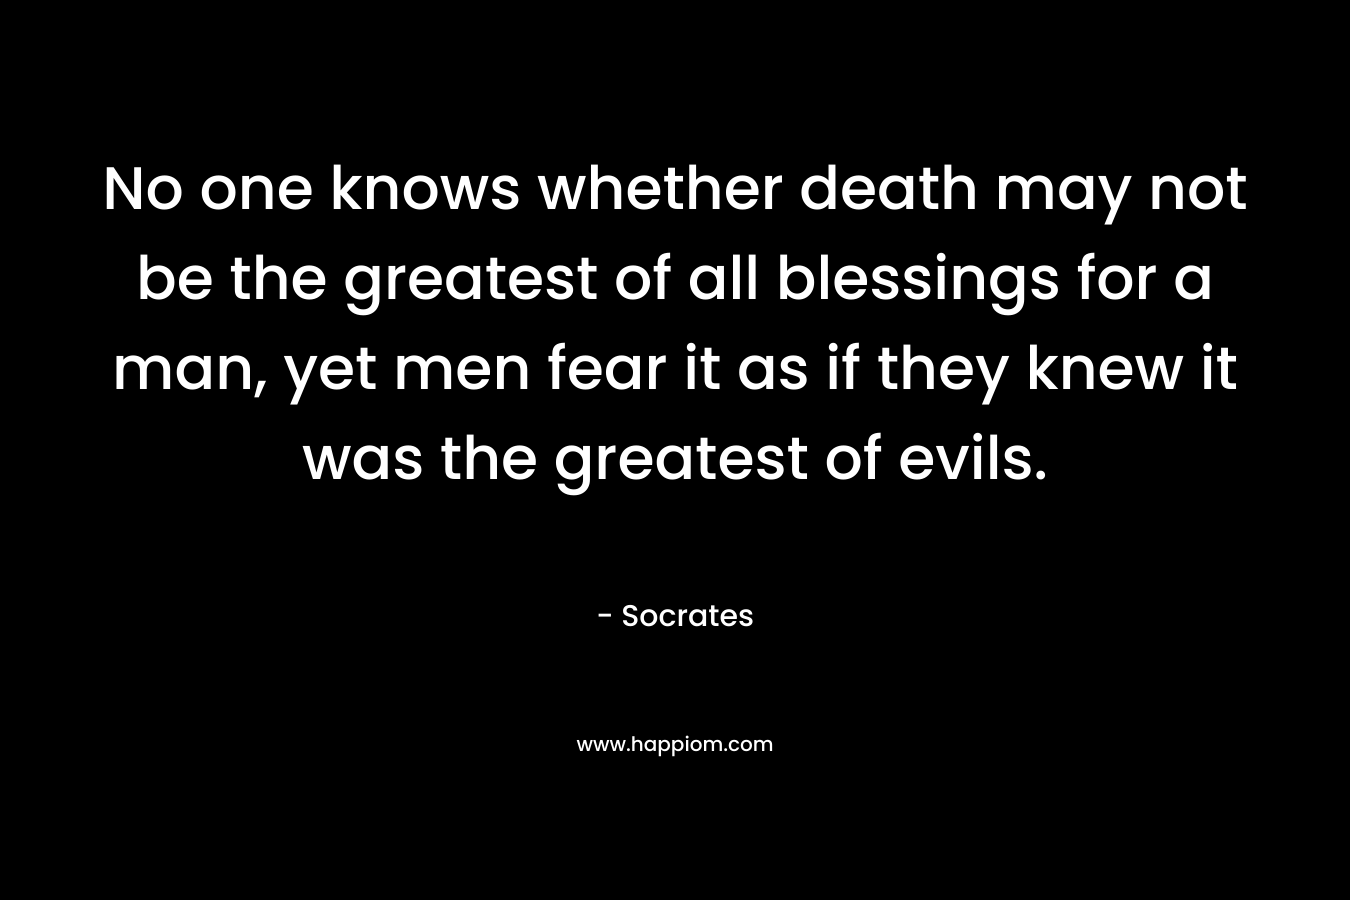 No one knows whether death may not be the greatest of all blessings for a man, yet men fear it as if they knew it was the greatest of evils.